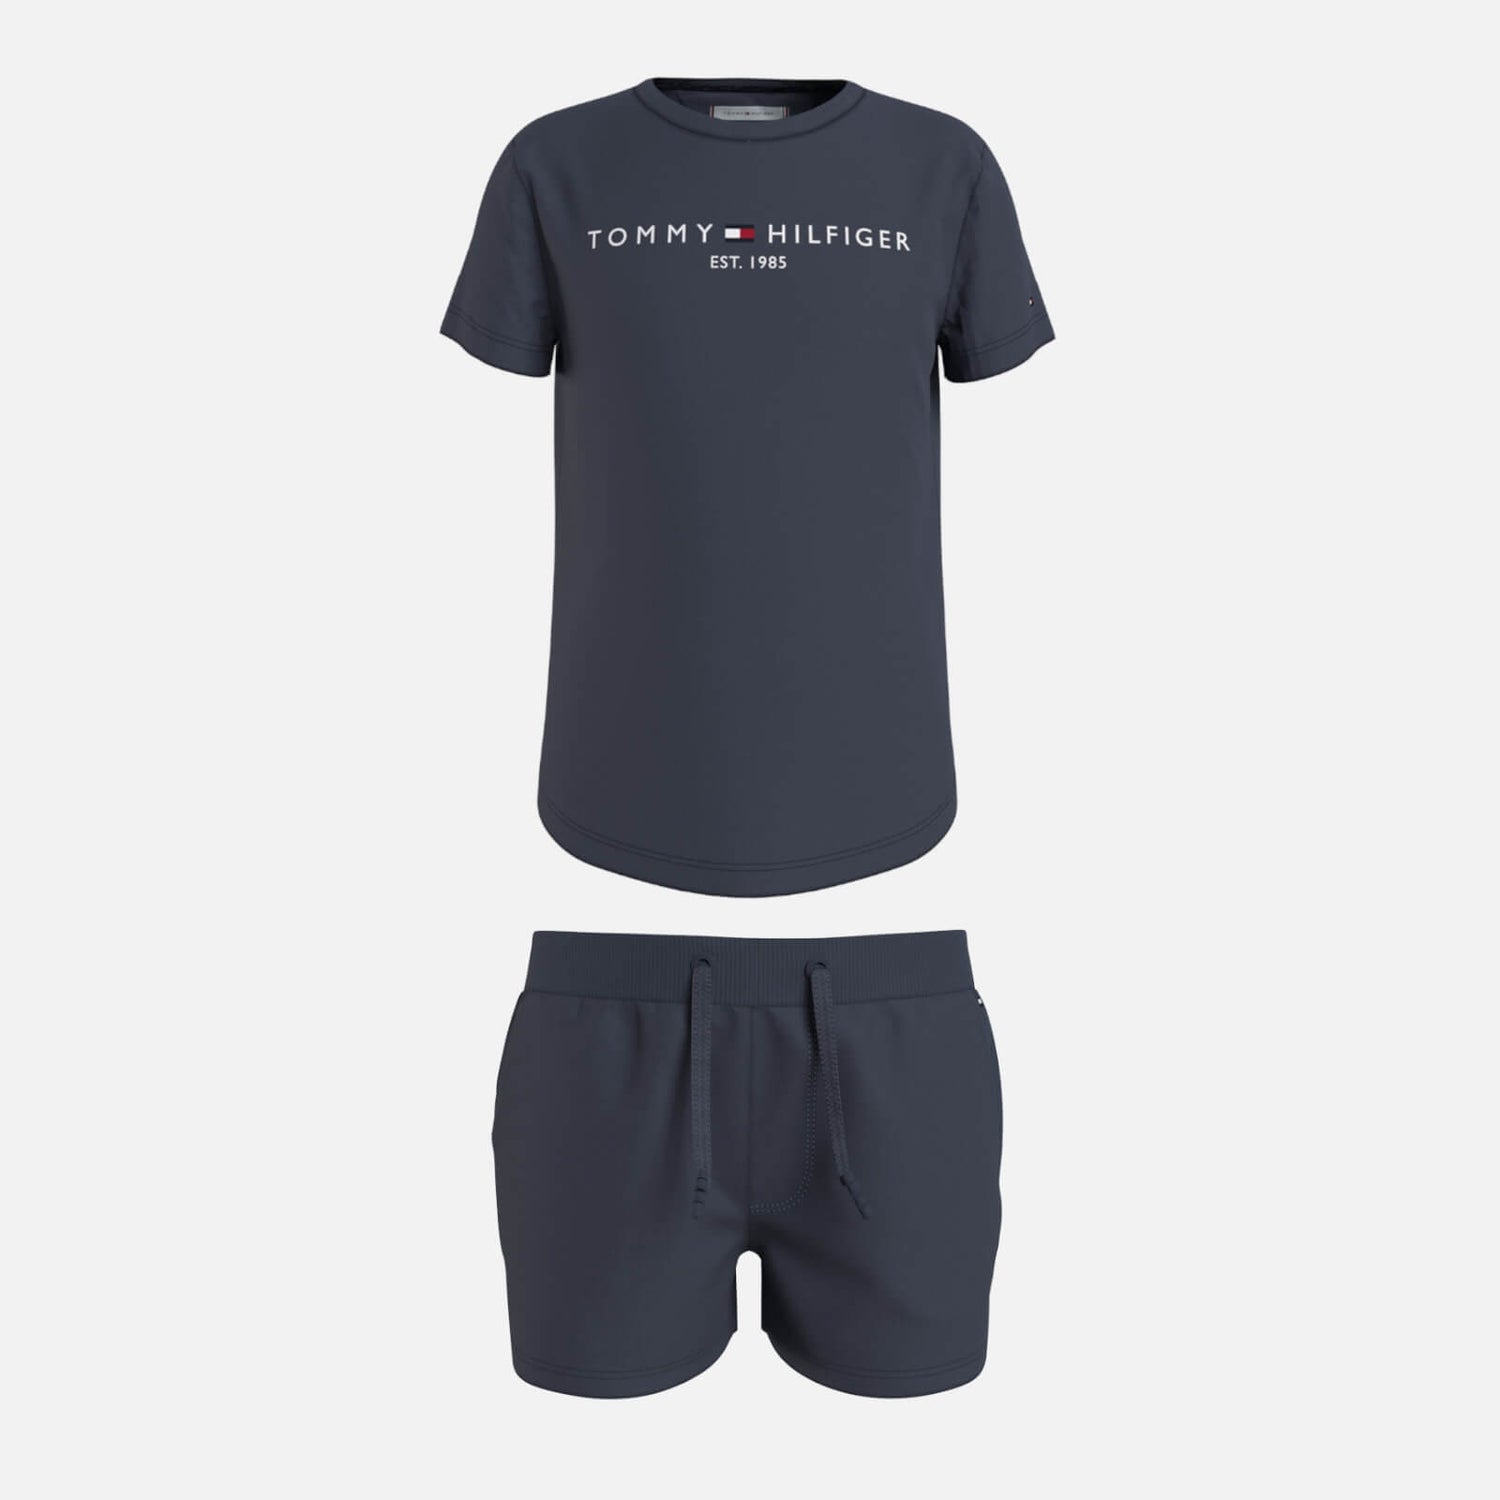 Tommy Hilfiger Girls’ Cotton-Blend French Terry T-Shirt and Short Set - 8 Years